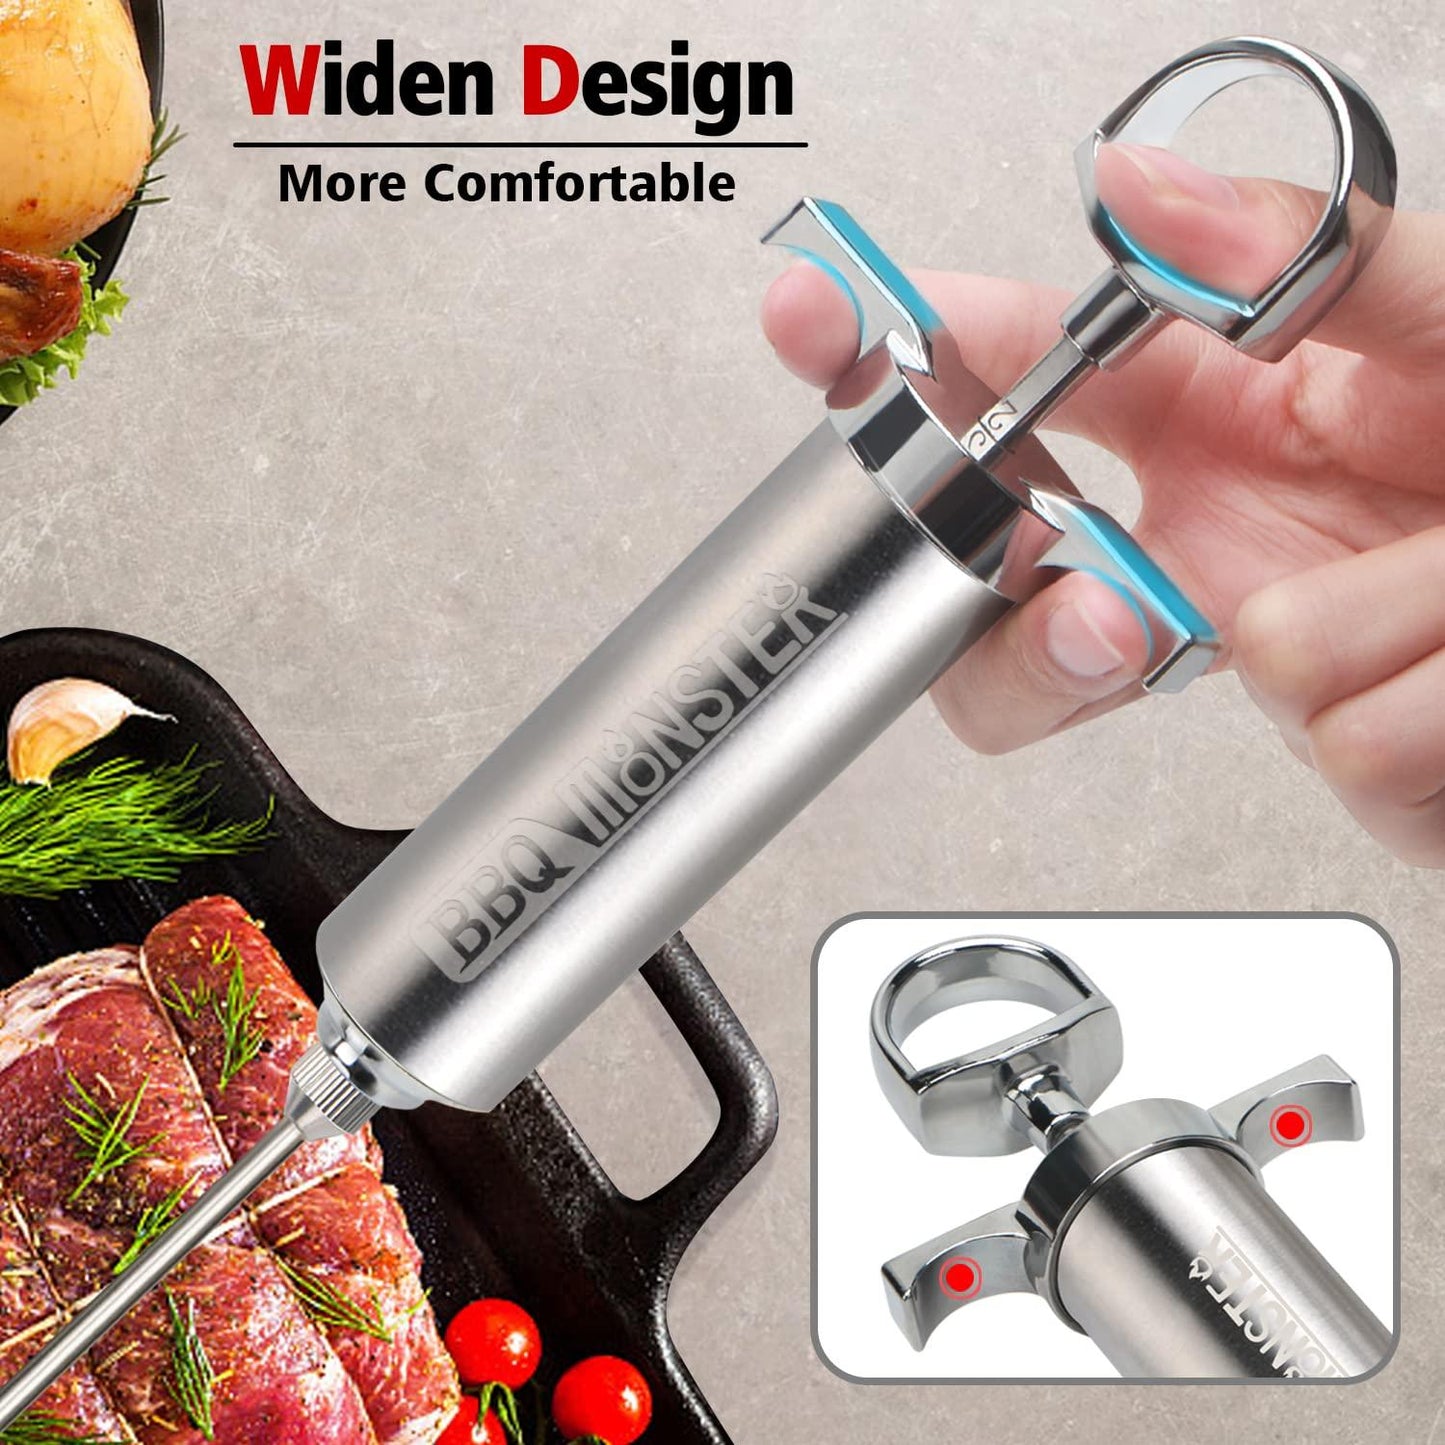 BBQ Monster Meat Injector Syringe Kit with 4 Professional Marinade Injector Needles for BBQ Grill Smoker, Turkey and Brisket; 2-oz Large Capacity, Including Paper User Manual, Recipe E-Book (PDF) - CookCave